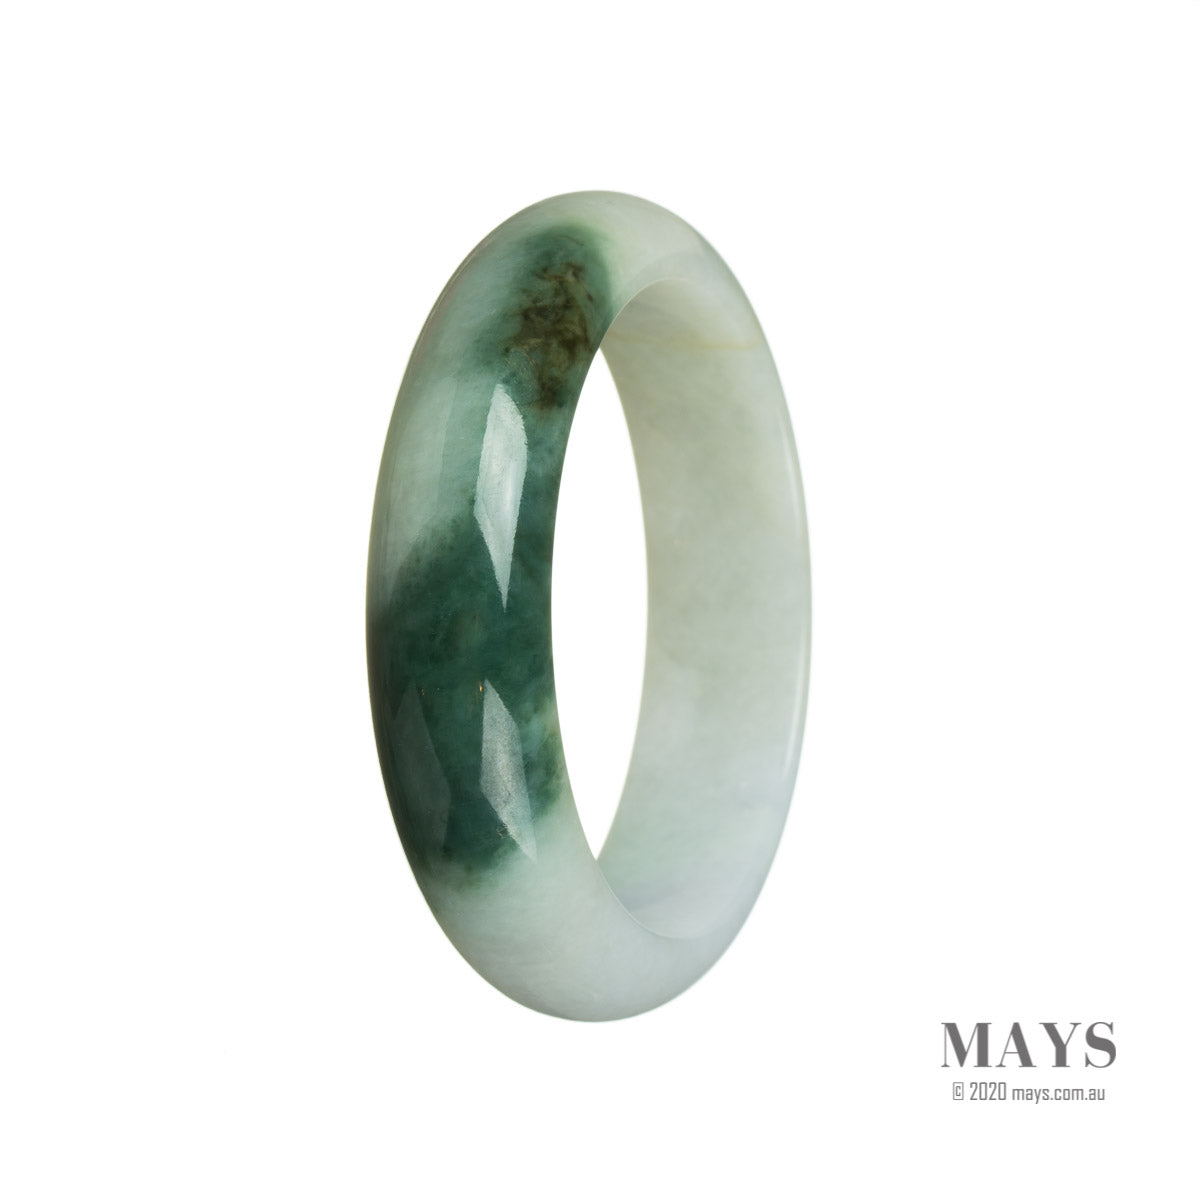 A close-up image of a beautiful, half-moon shaped white flower jade bracelet made of untreated jadeite. The bracelet is 52mm in size and is crafted by MAYS GEMS.